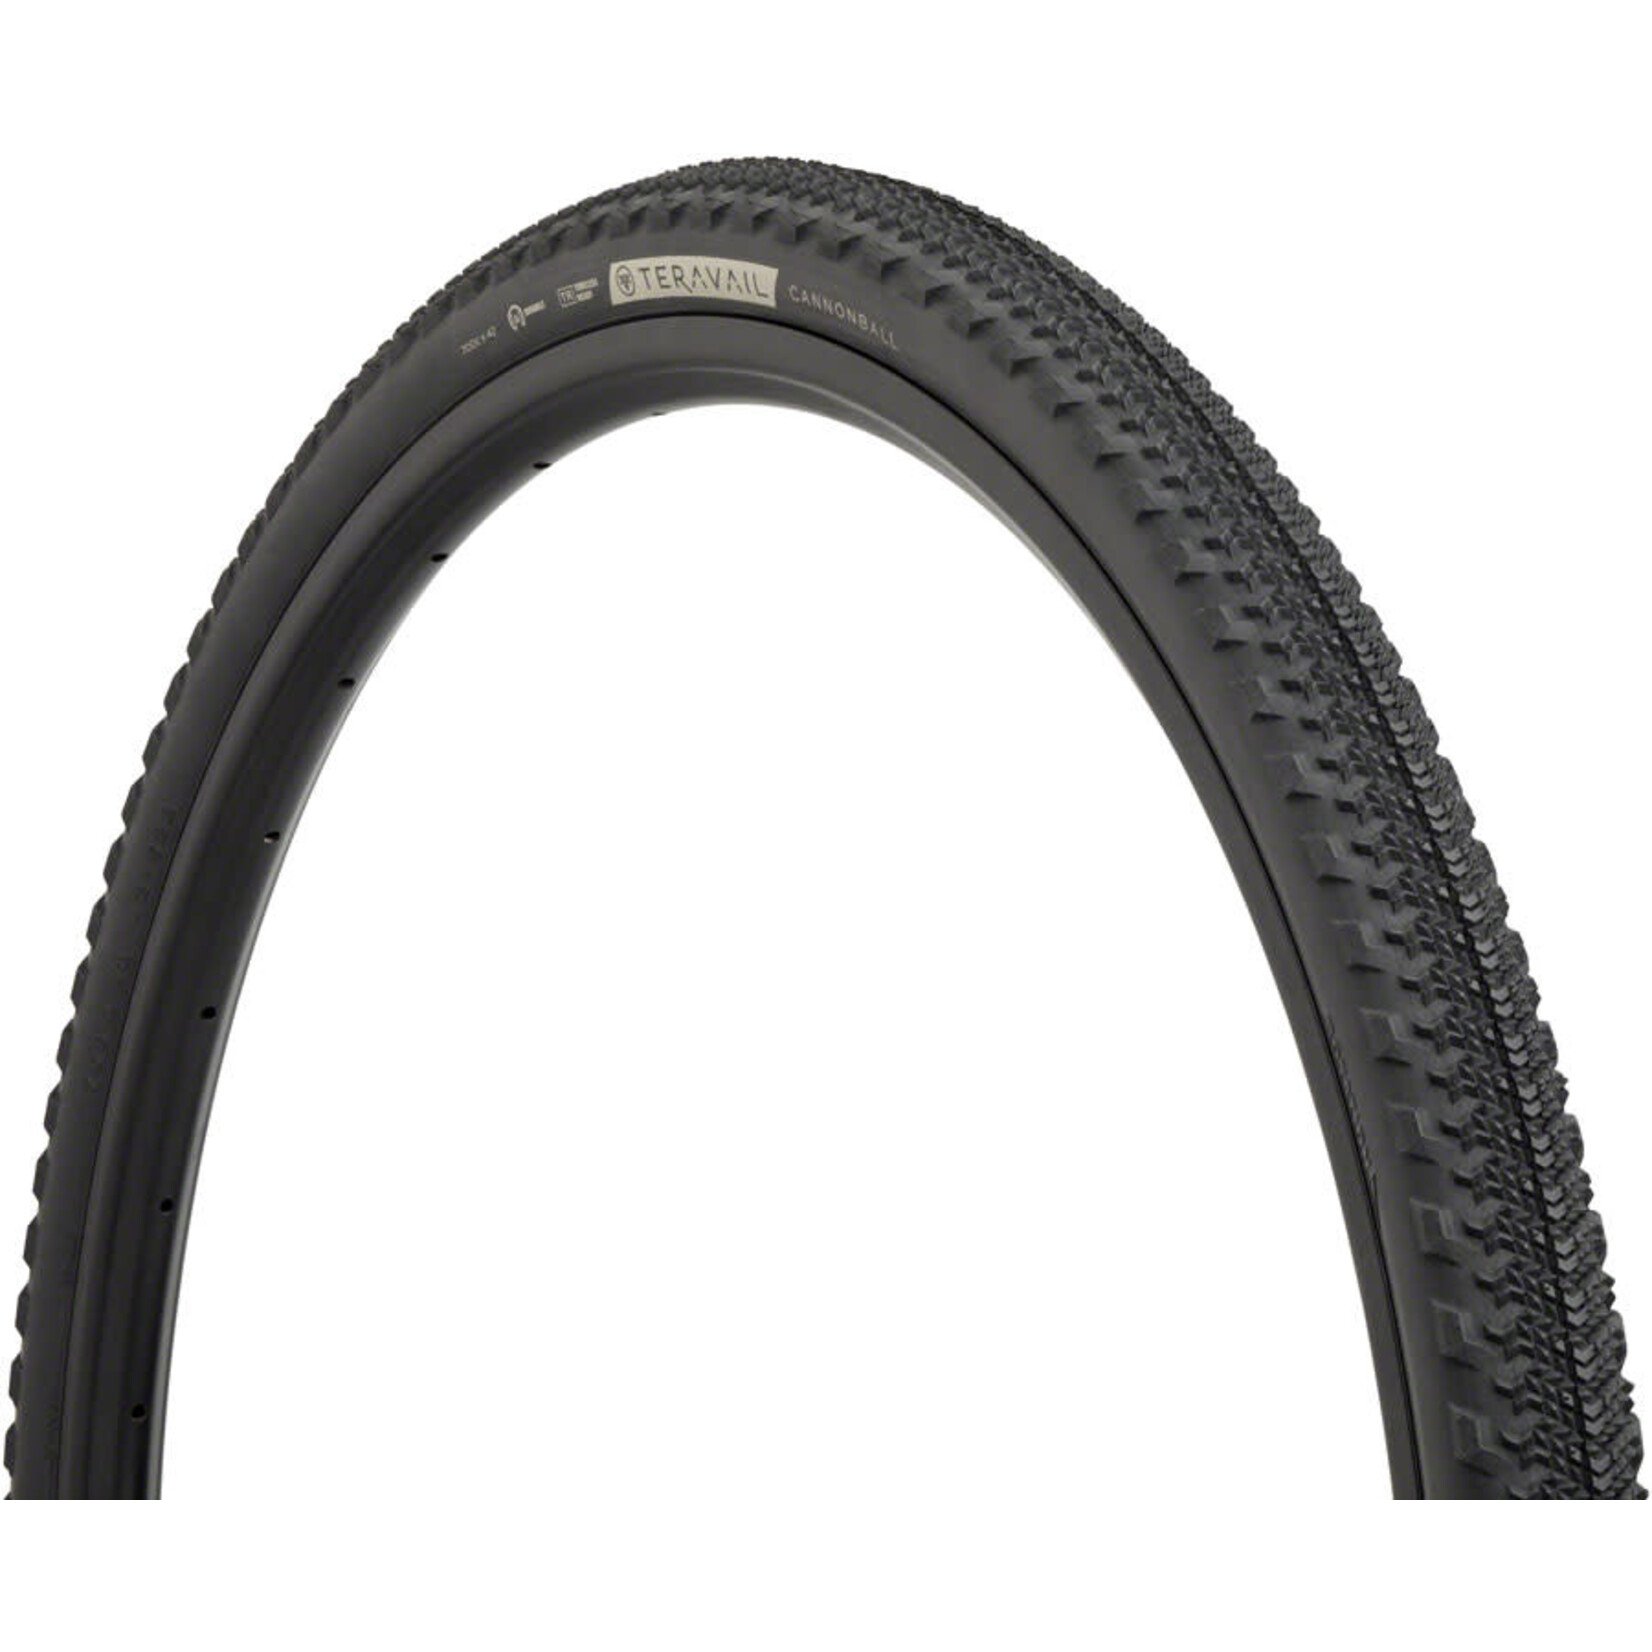 Teravail Teravail Cannonball Tire - 700 x 42, Tubeless, Folding, Black, Durable, Fast Compound